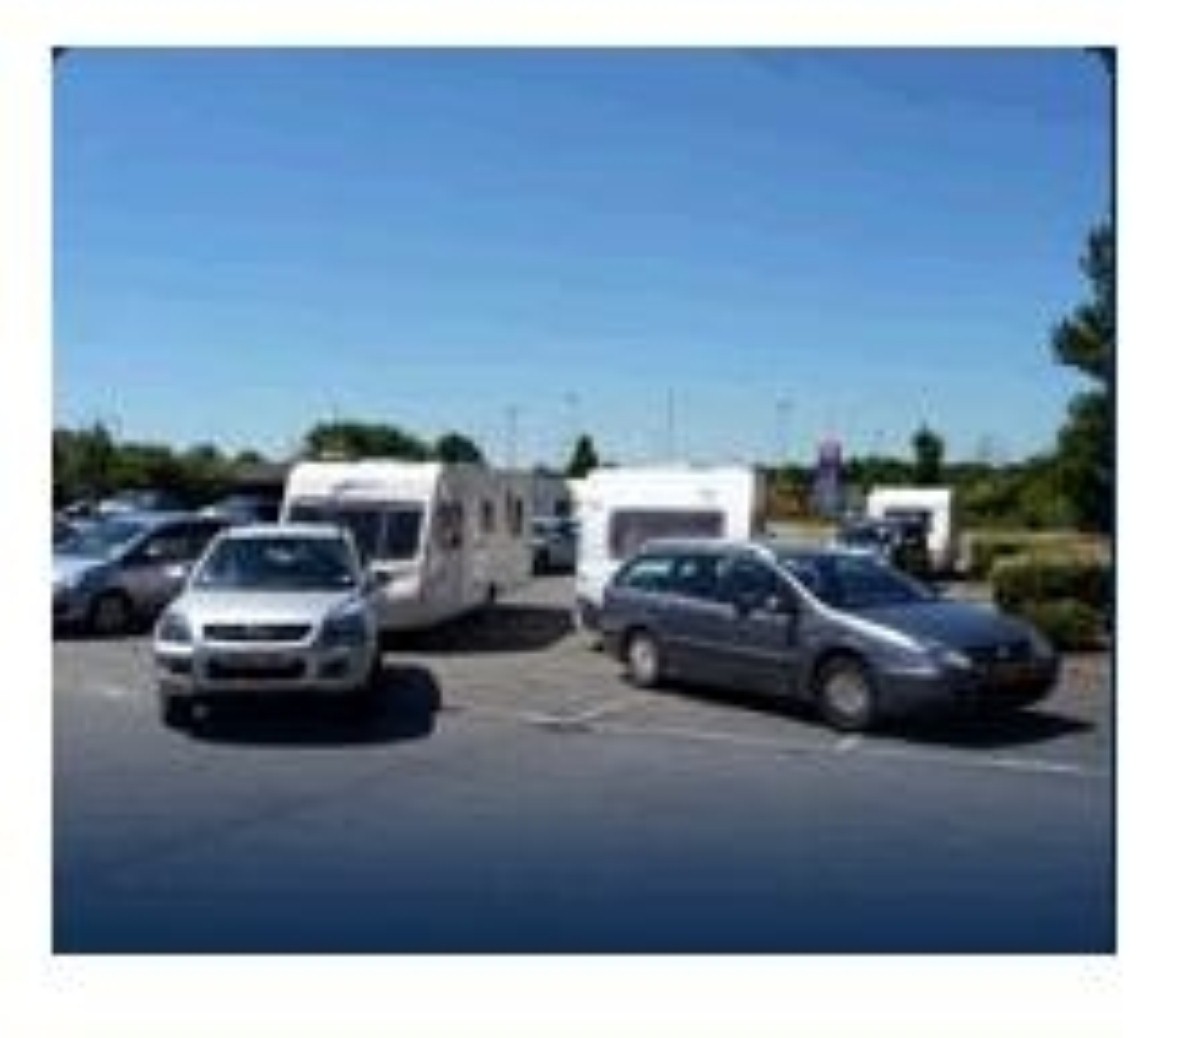 Roadchef has committed to providing safer access and parking for Caravan Club members